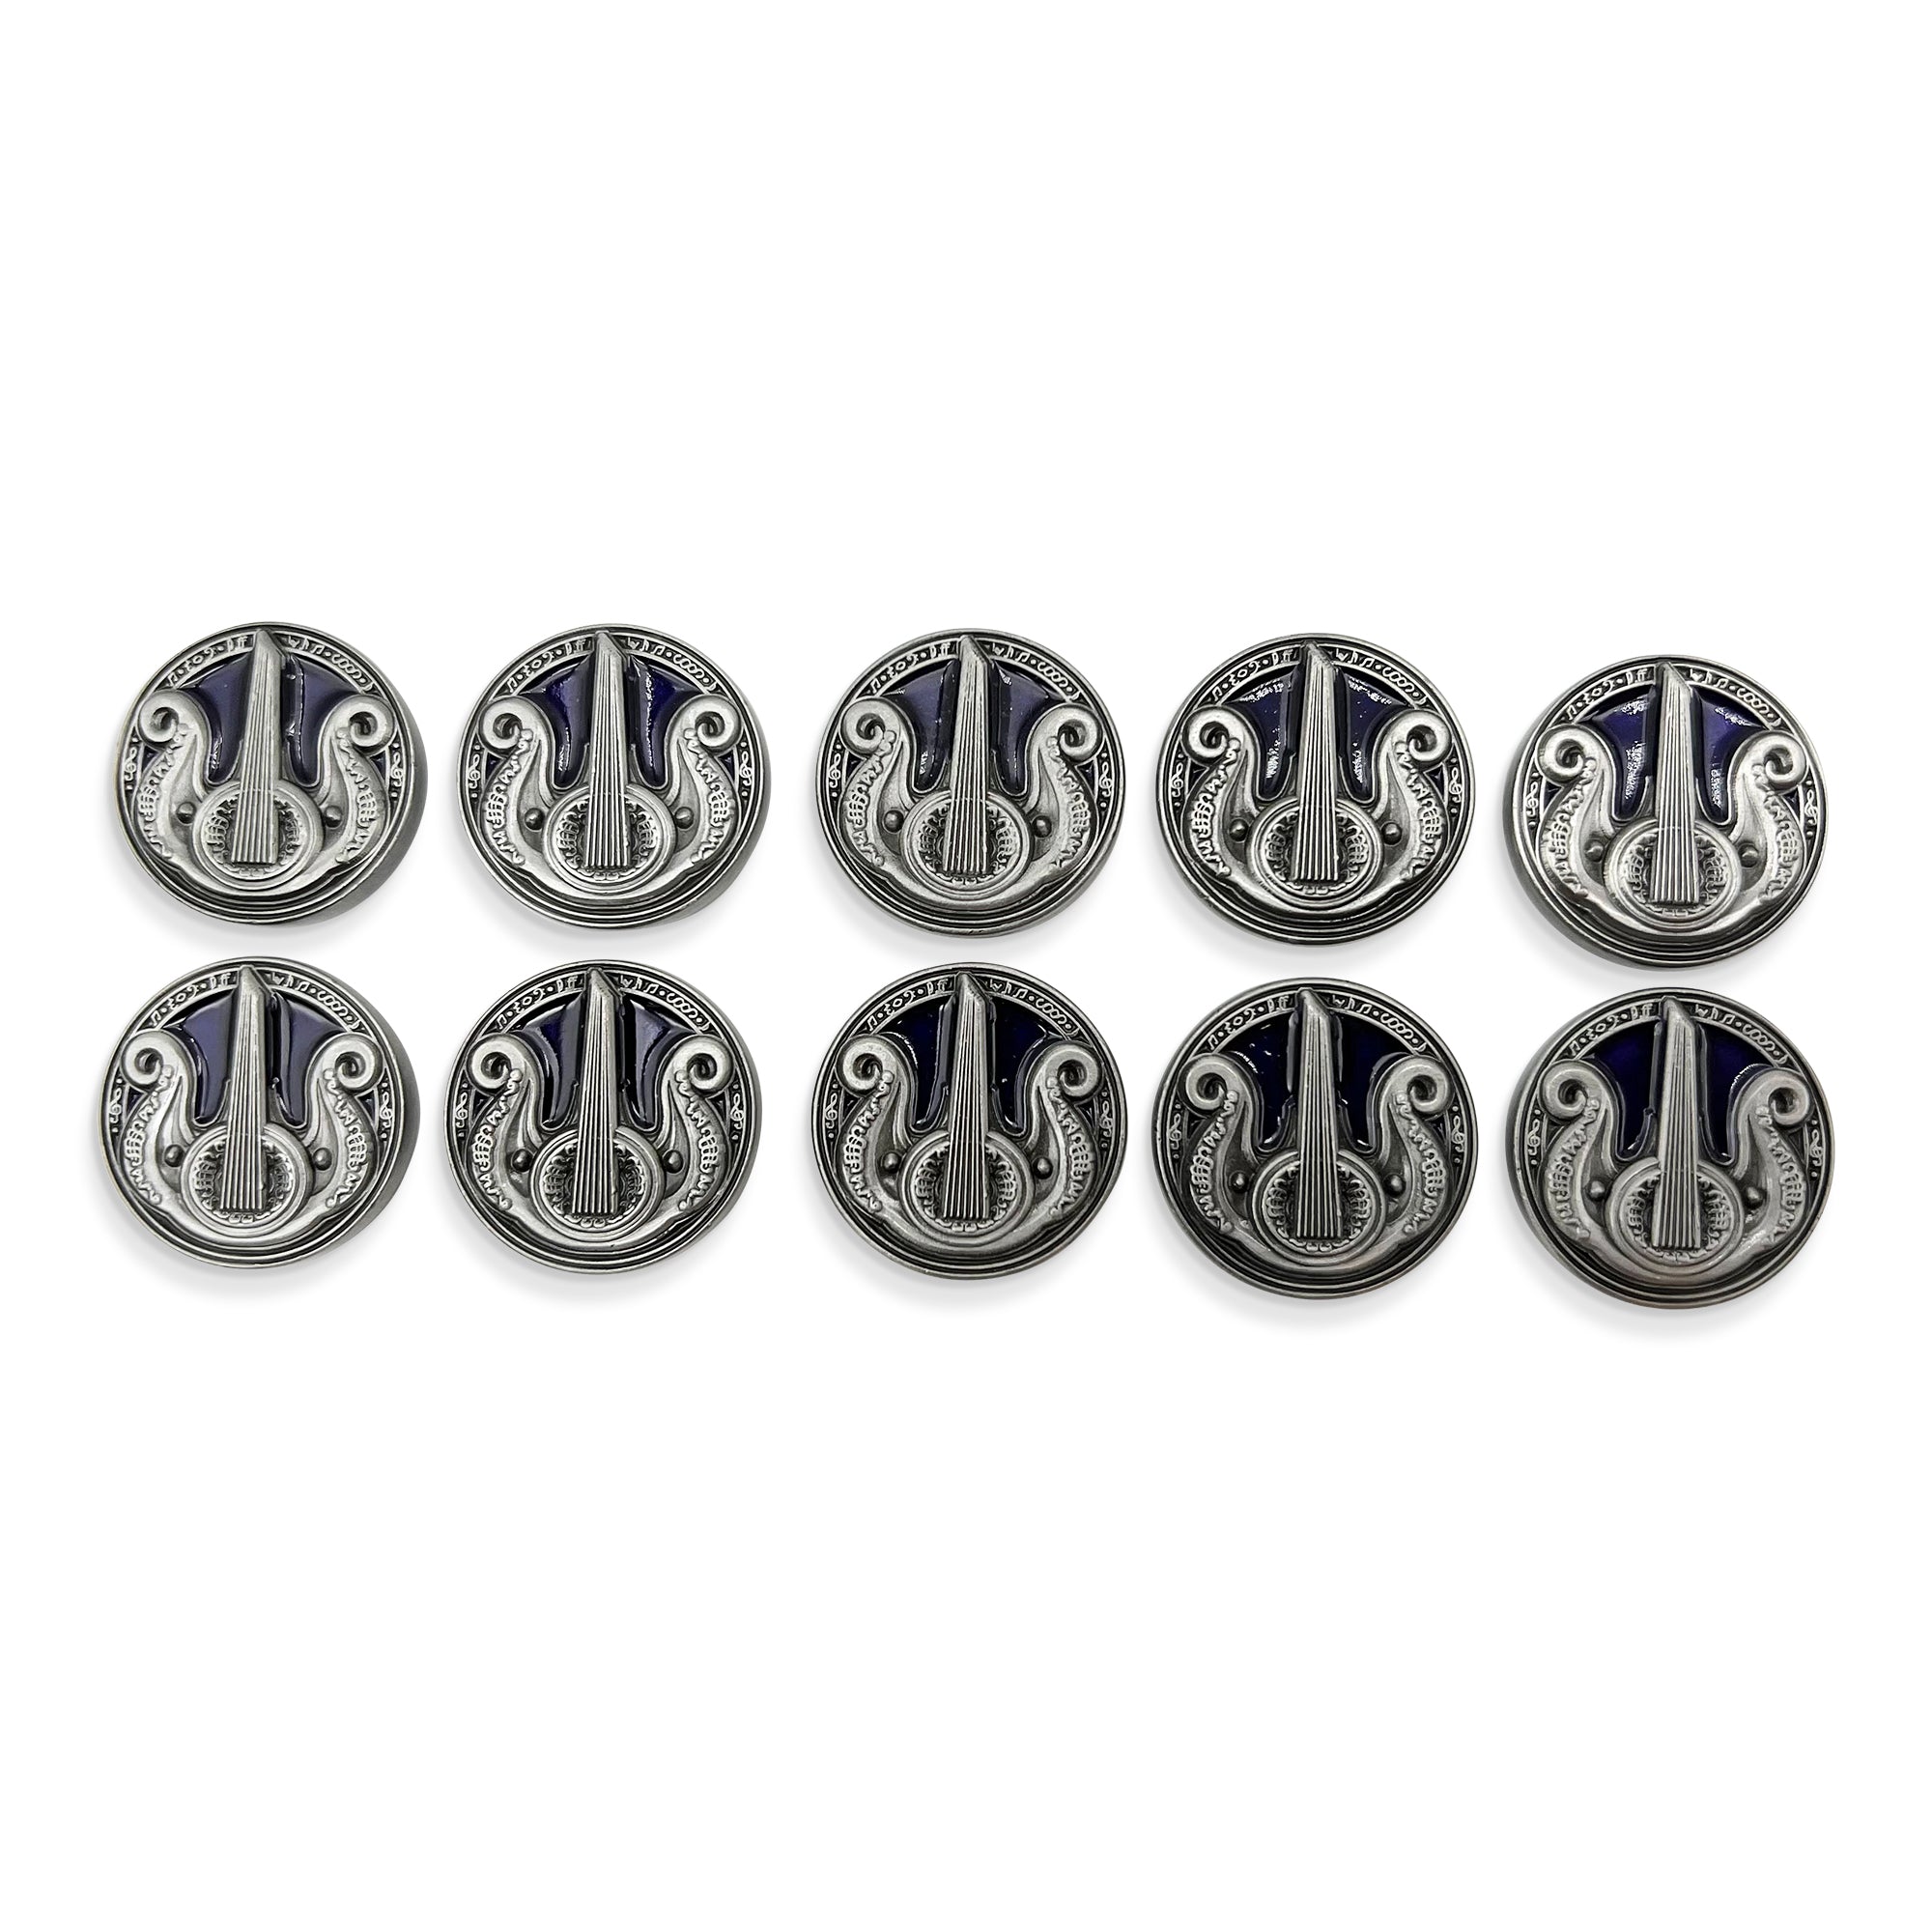 Profession Coins - Bard Metal Coins Set of 10 - NOR 03407